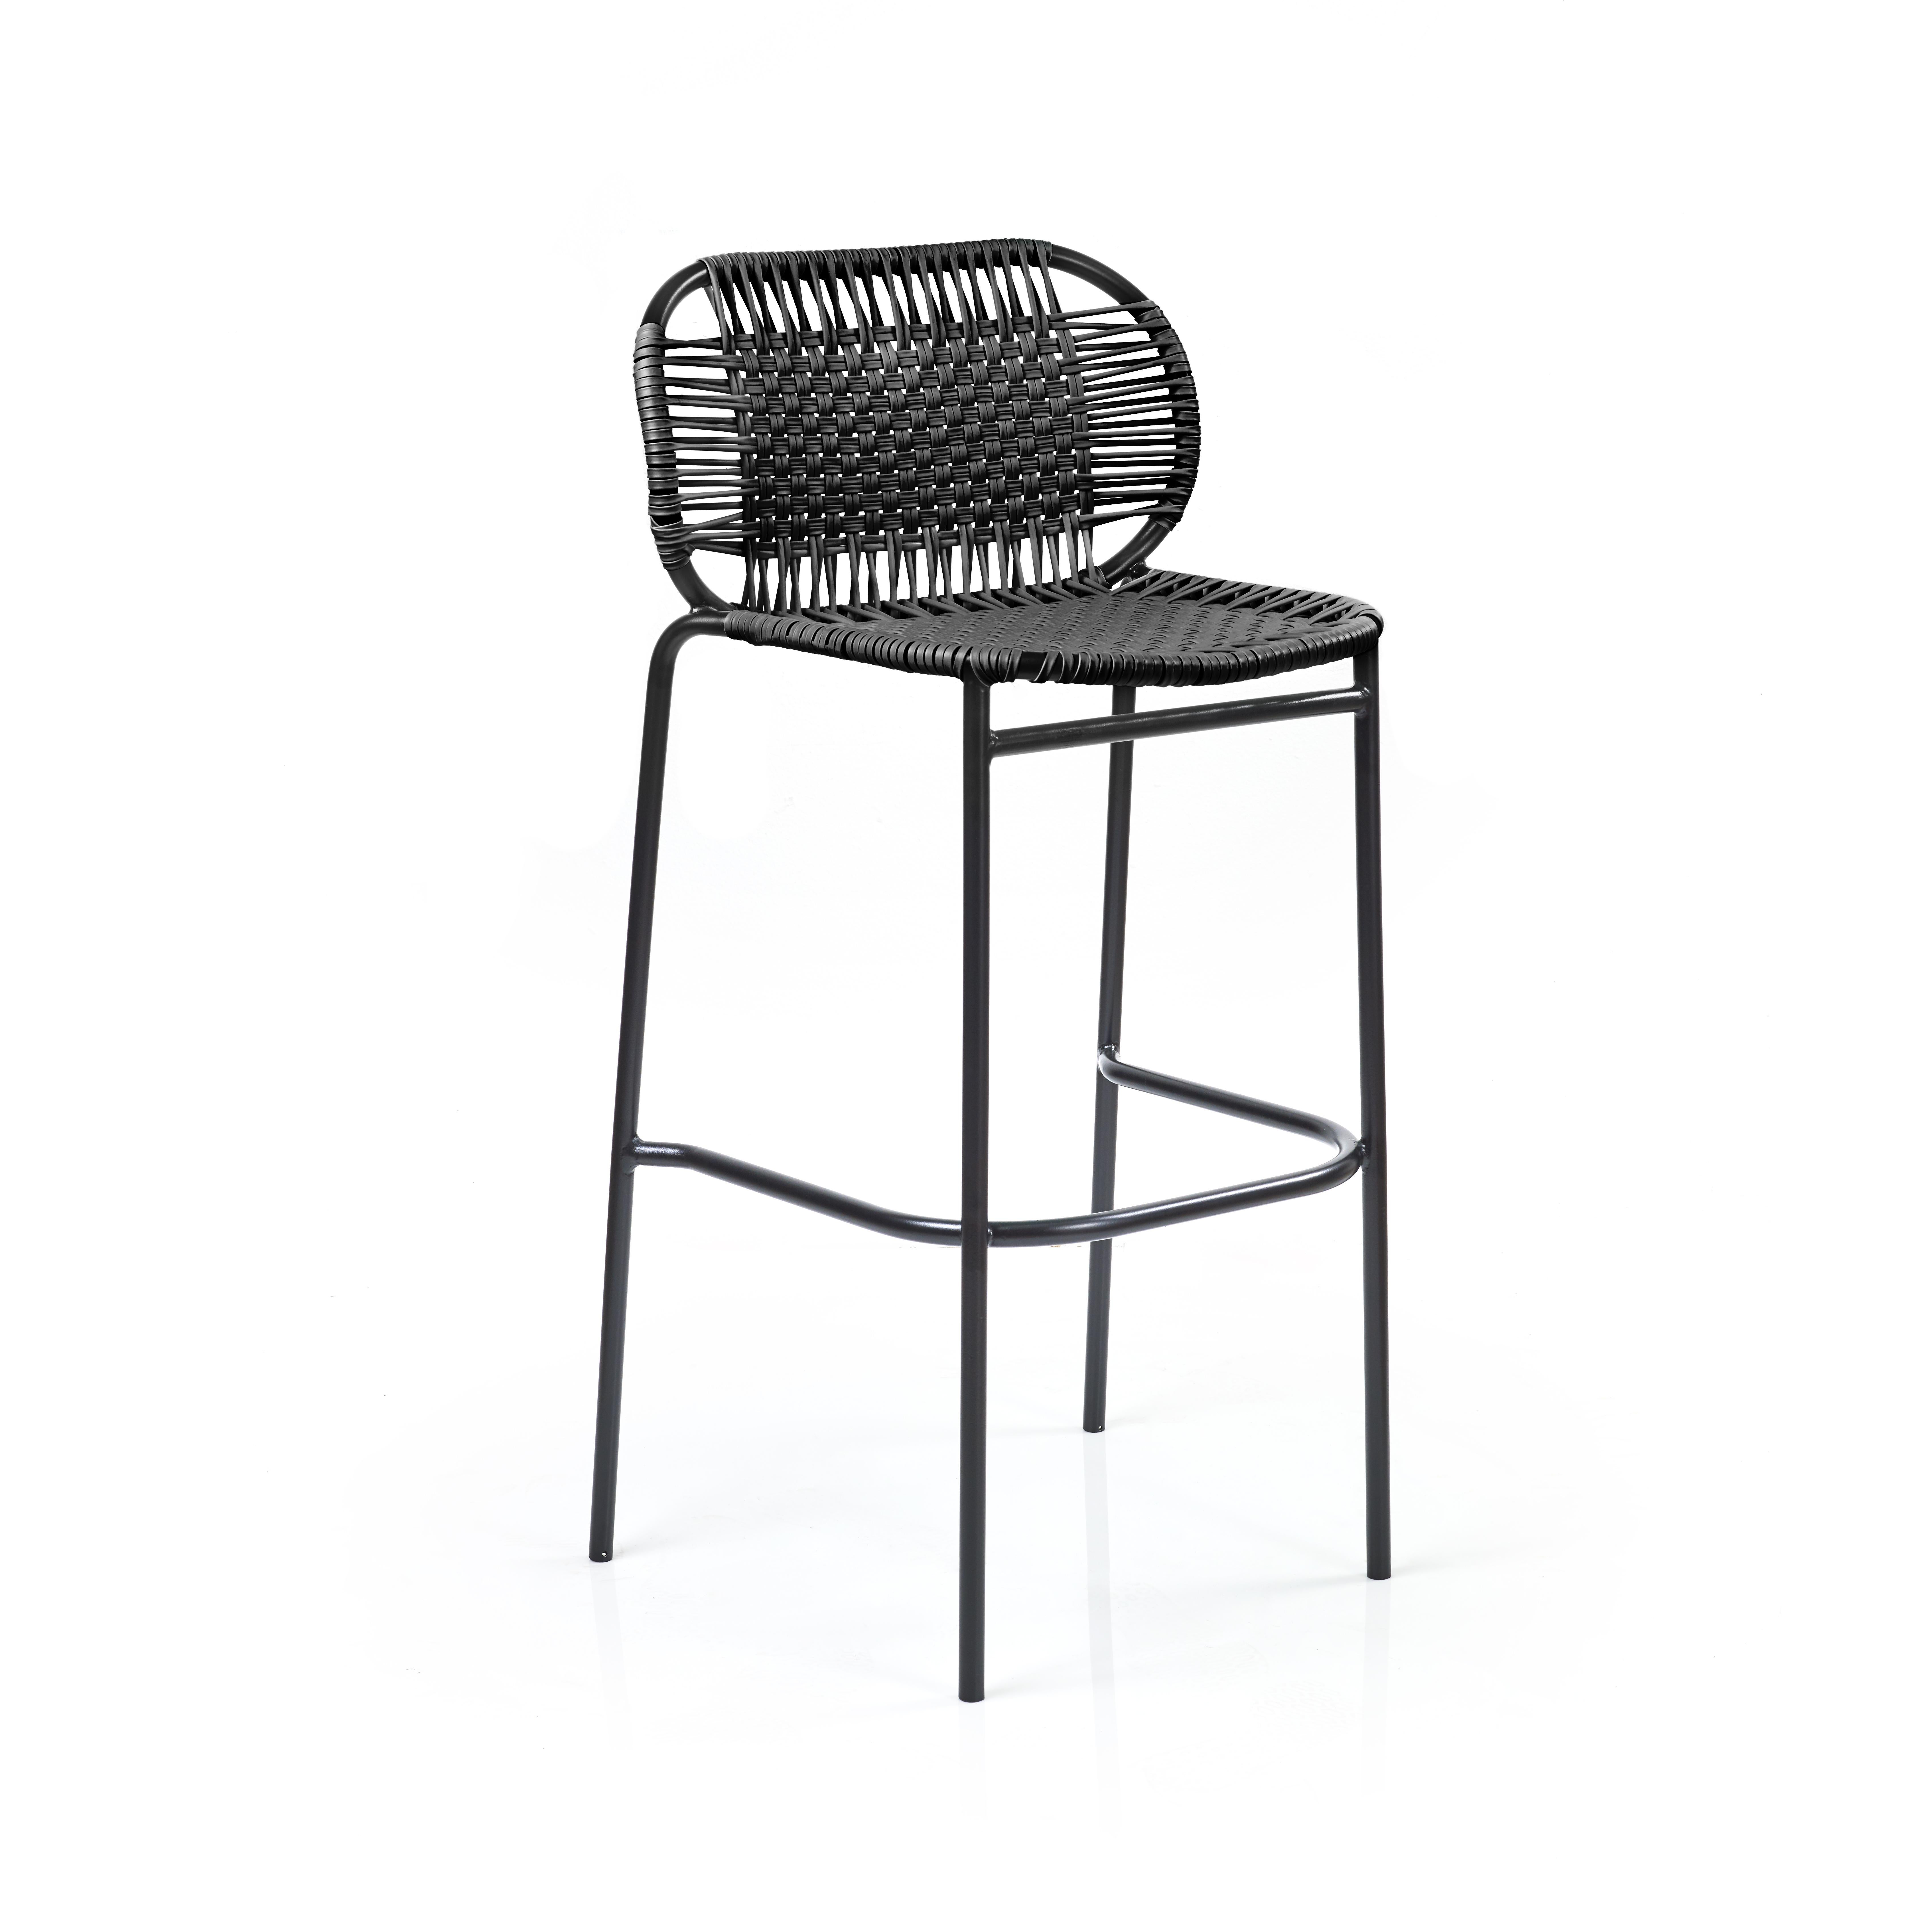 Black Cielo bar stool by Sebastian Herkner
Materials: Galvanized and powder-coated tubular steel. PVC strings are made from recycled plastic.
Technique: Made from recycled plastic and weaved by local craftspeople in Cartagena, Colombia.